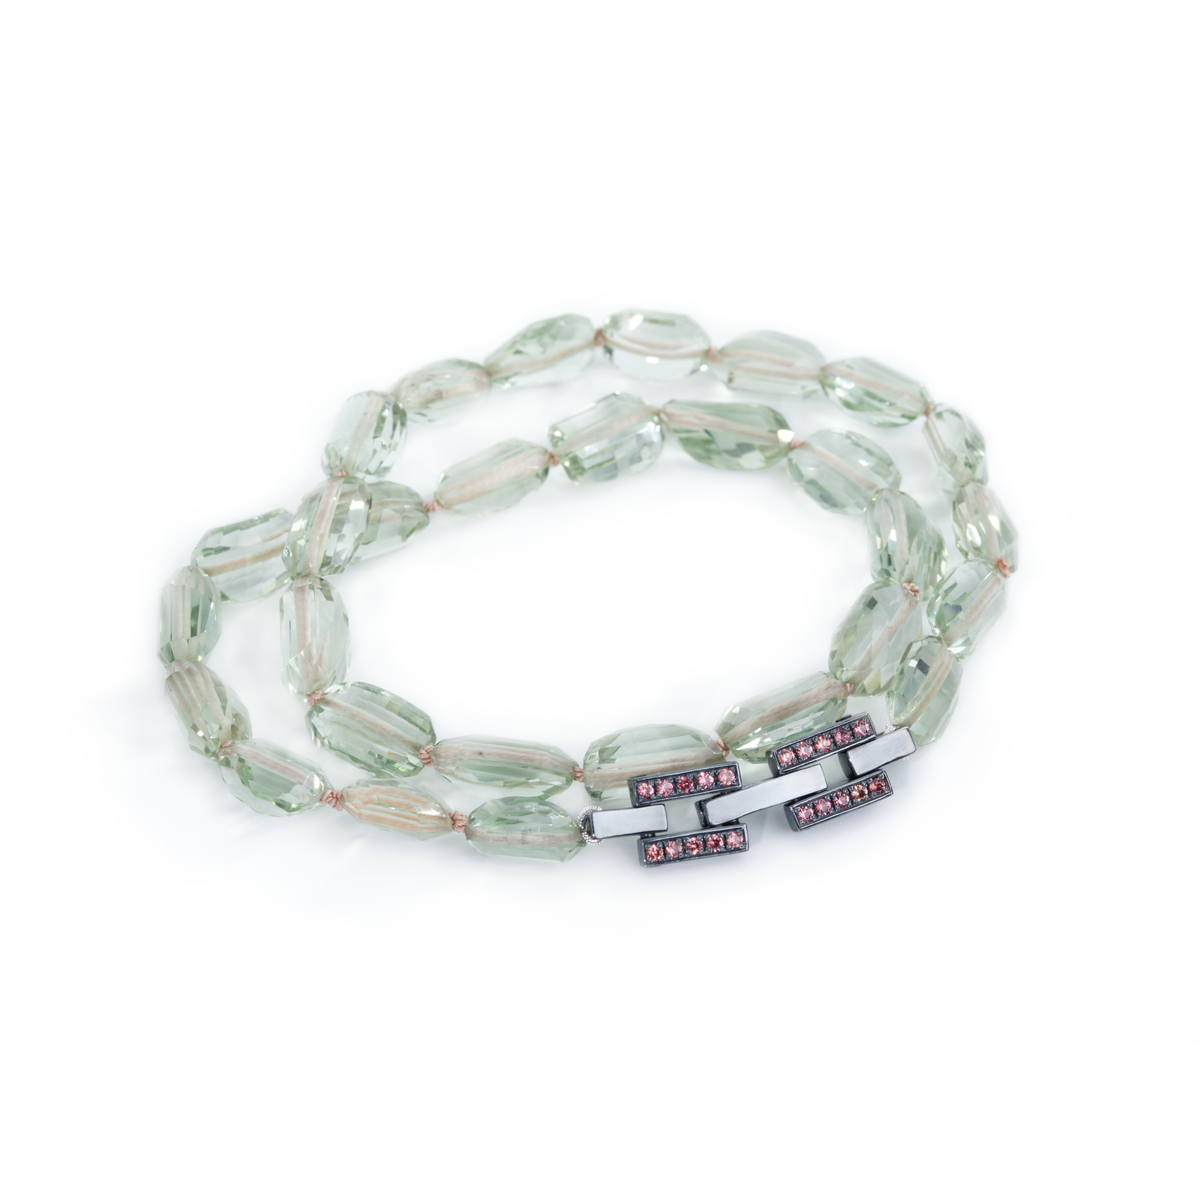 The photo shows a green prasiolite necklace, hand-knotted. The necklace's clasp is made of blackened silver and decorated with pink-peach sapphires.